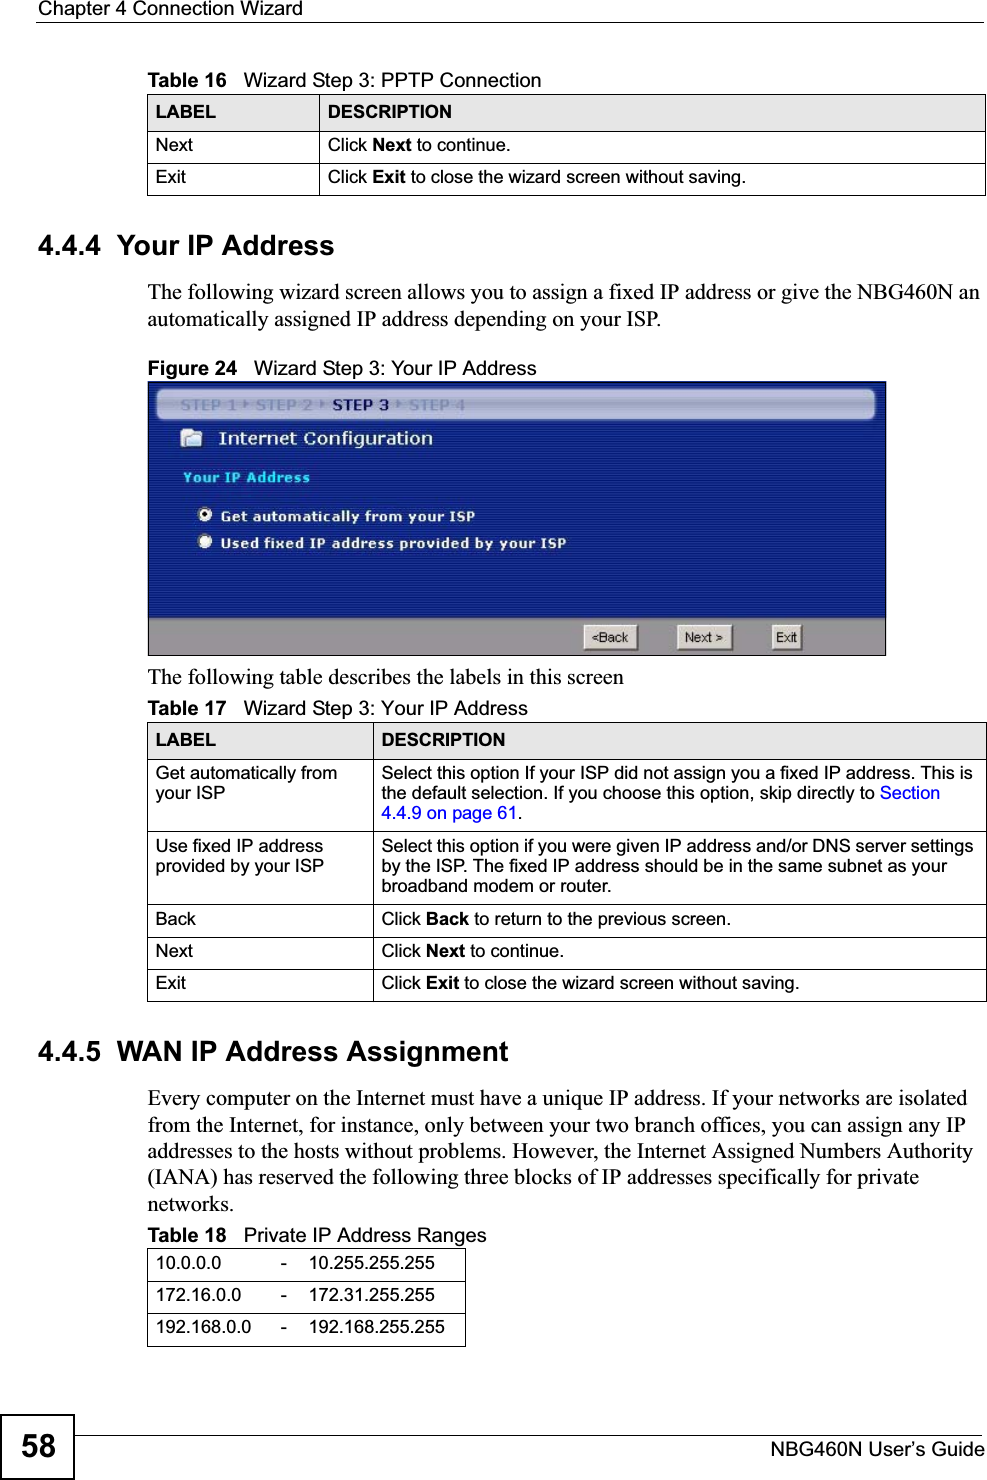 Chapter 4 Connection WizardNBG460N User’s Guide584.4.4  Your IP AddressThe following wizard screen allows you to assign a fixed IP address or give the NBG460N an automatically assigned IP address depending on your ISP.Figure 24   Wizard Step 3: Your IP AddressThe following table describes the labels in this screen4.4.5  WAN IP Address AssignmentEvery computer on the Internet must have a unique IP address. If your networks are isolated from the Internet, for instance, only between your two branch offices, you can assign any IP addresses to the hosts without problems. However, the Internet Assigned Numbers Authority (IANA) has reserved the following three blocks of IP addresses specifically for private networks.Next Click Next to continue. Exit Click Exit to close the wizard screen without saving.Table 16   Wizard Step 3: PPTP ConnectionLABEL DESCRIPTIONTable 17   Wizard Step 3: Your IP AddressLABEL DESCRIPTIONGet automatically from your ISP Select this option If your ISP did not assign you a fixed IP address. This is the default selection. If you choose this option, skip directly to Section4.4.9 on page 61.Use fixed IP address provided by your ISPSelect this option if you were given IP address and/or DNS server settings by the ISP. The fixed IP address should be in the same subnet as your broadband modem or router. Back Click Back to return to the previous screen.Next Click Next to continue. Exit Click Exit to close the wizard screen without saving.Table 18   Private IP Address Ranges10.0.0.0 -10.255.255.255172.16.0.0 -172.31.255.255192.168.0.0 -192.168.255.255